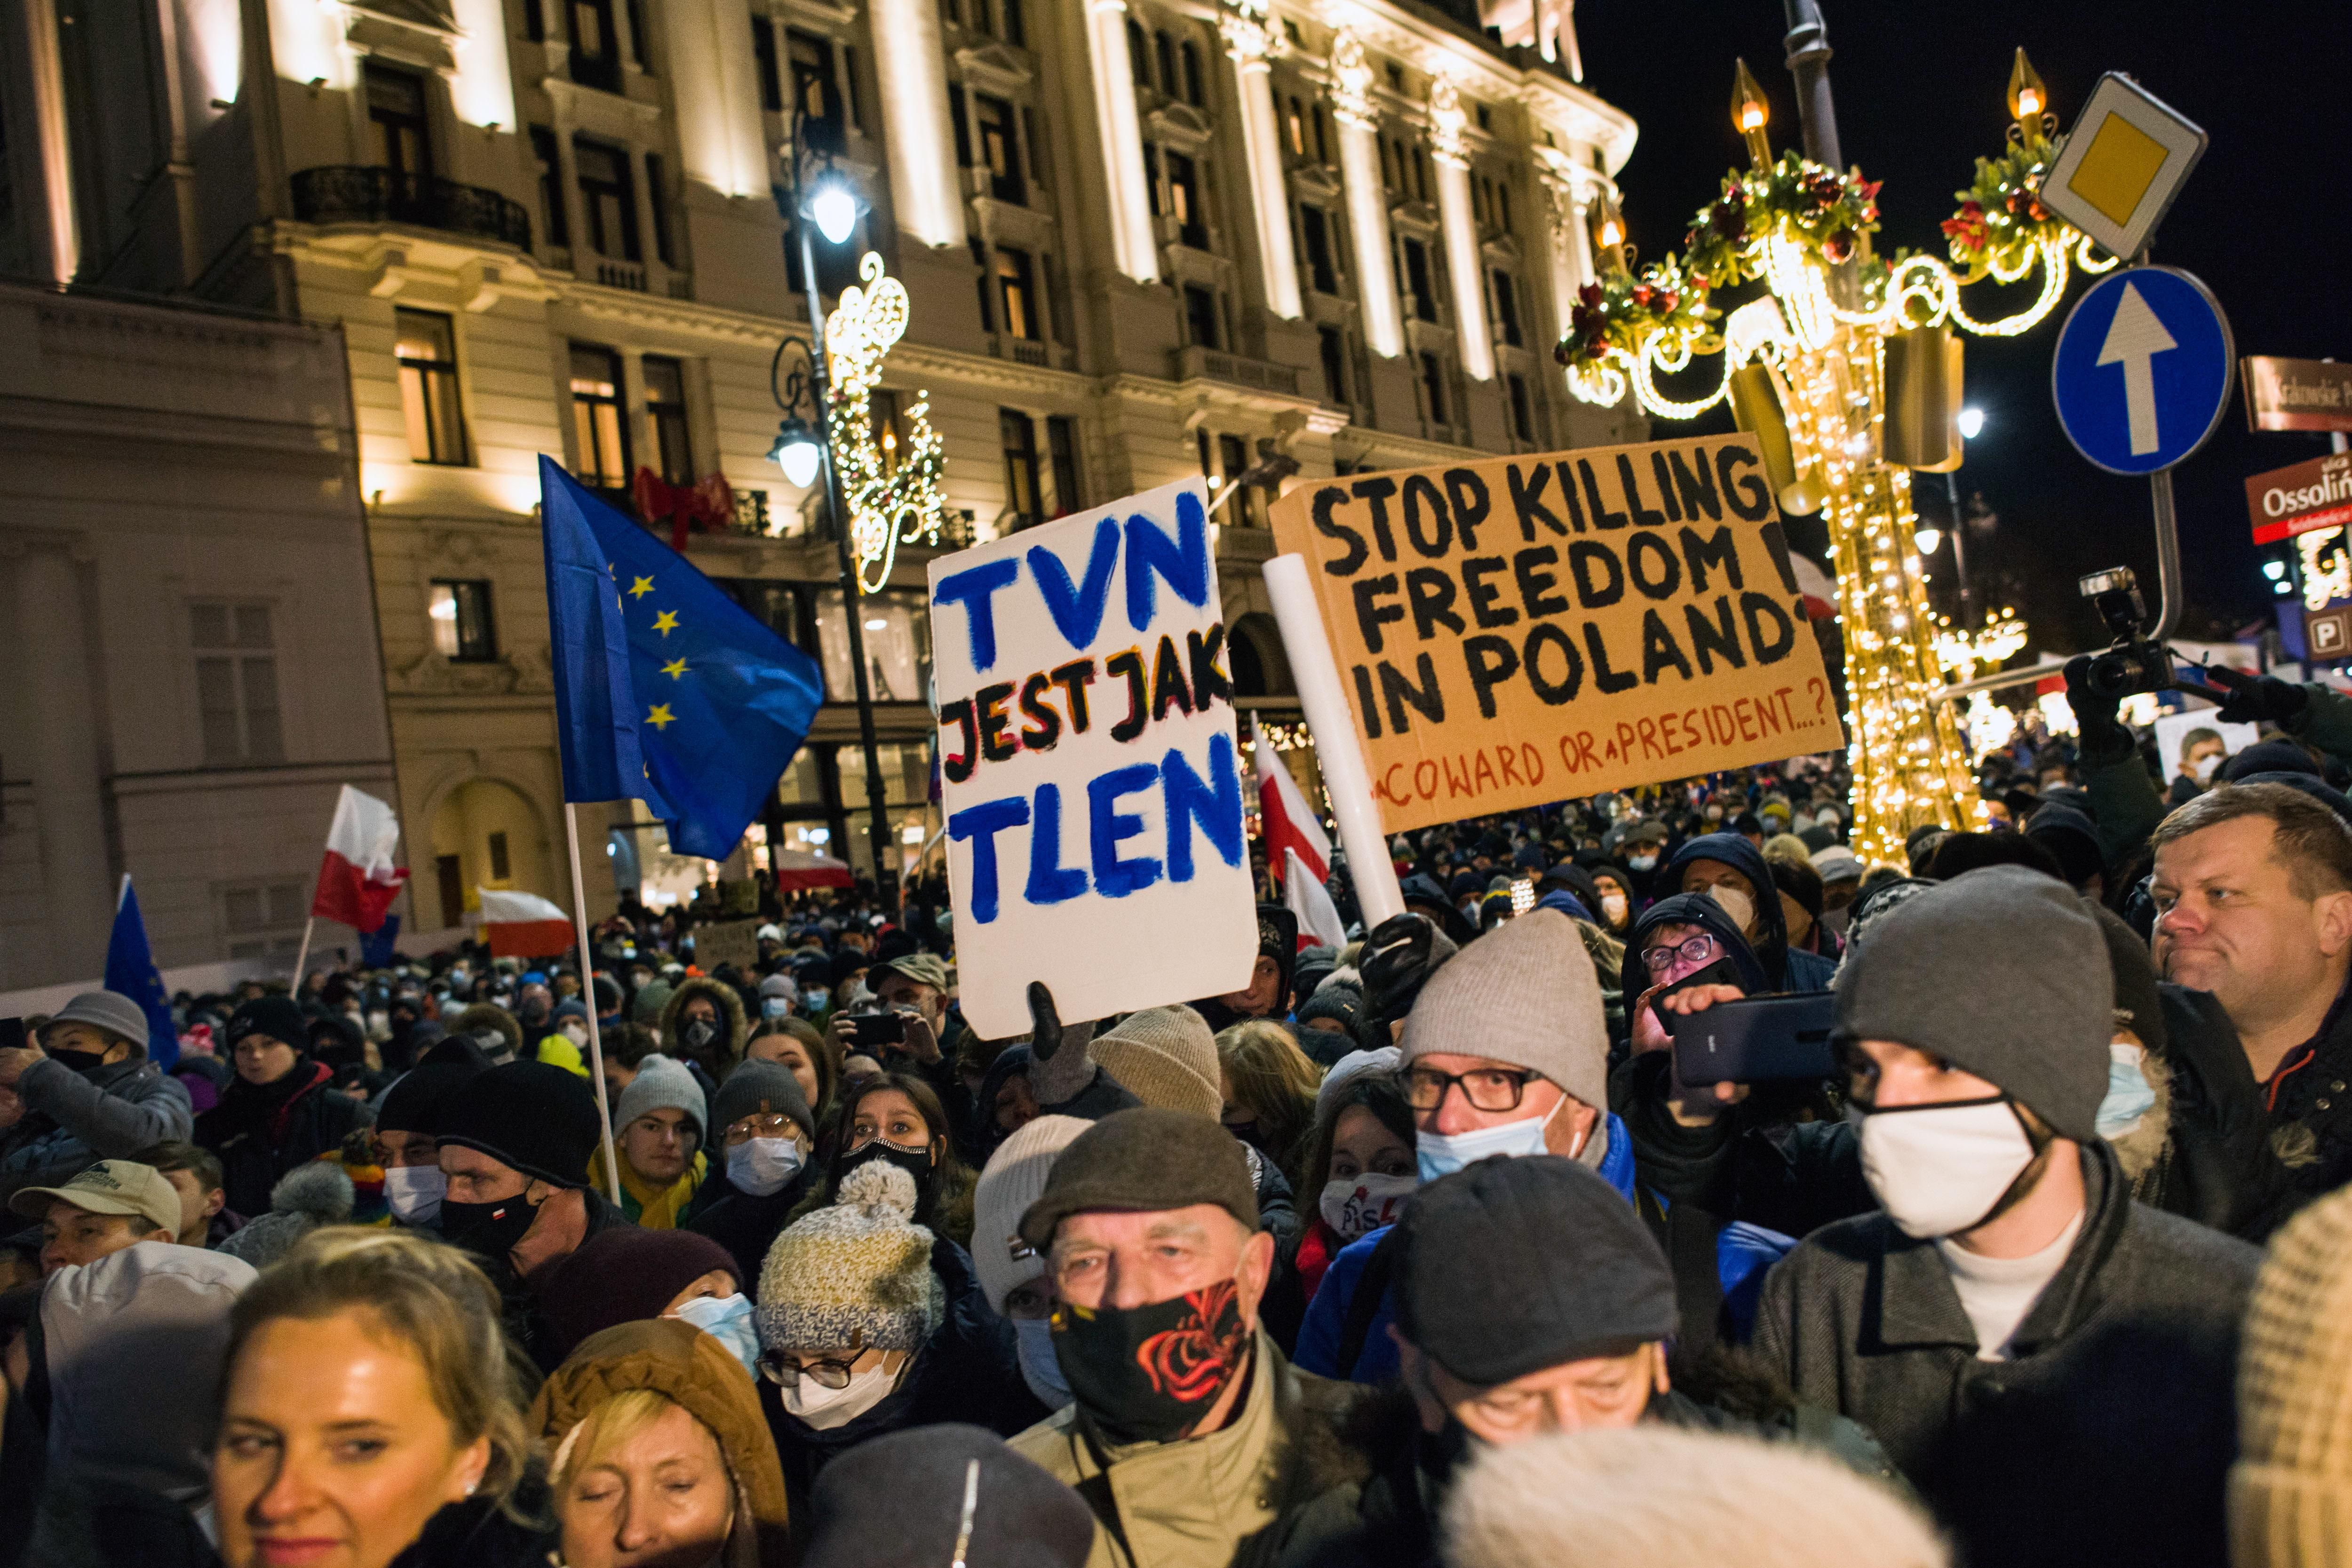 Demonstrators hold placards and flags during the demonstration. Thousands of people came to the presidential palace in Warsaw to protest against restrictions of media freedom by the Polish government